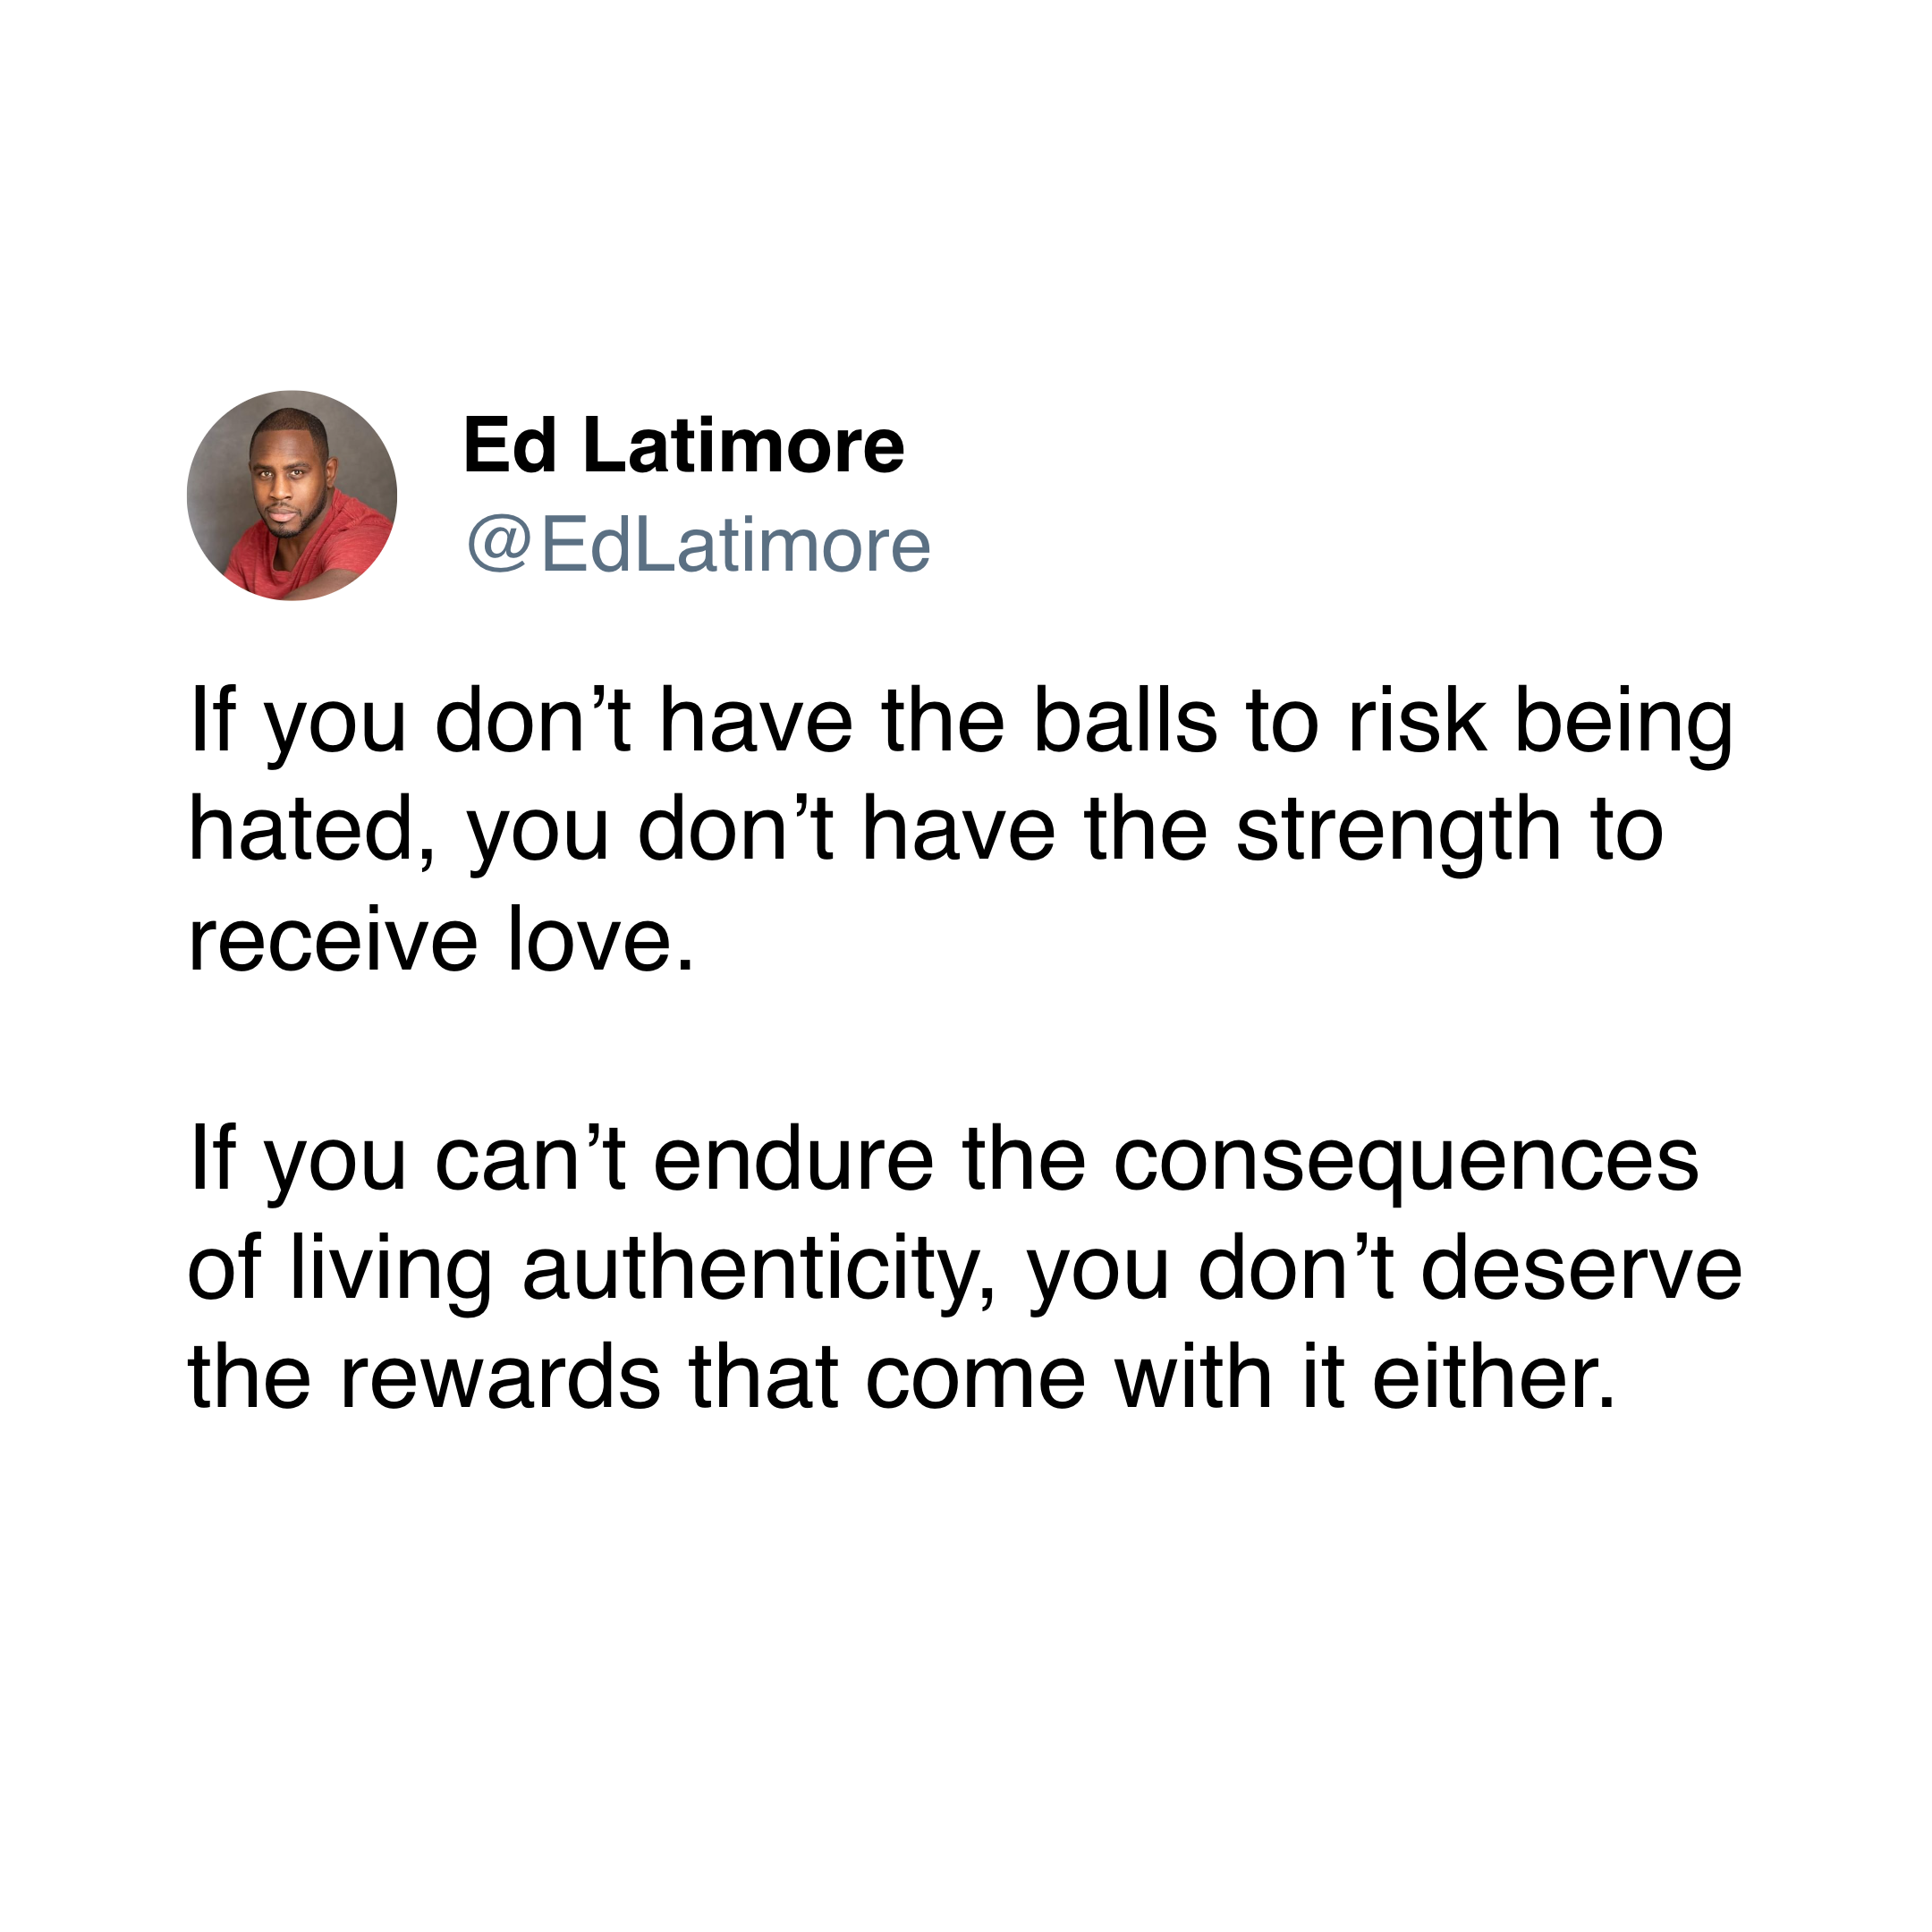 ed latimore authenticity quote "balls to risk being hated"